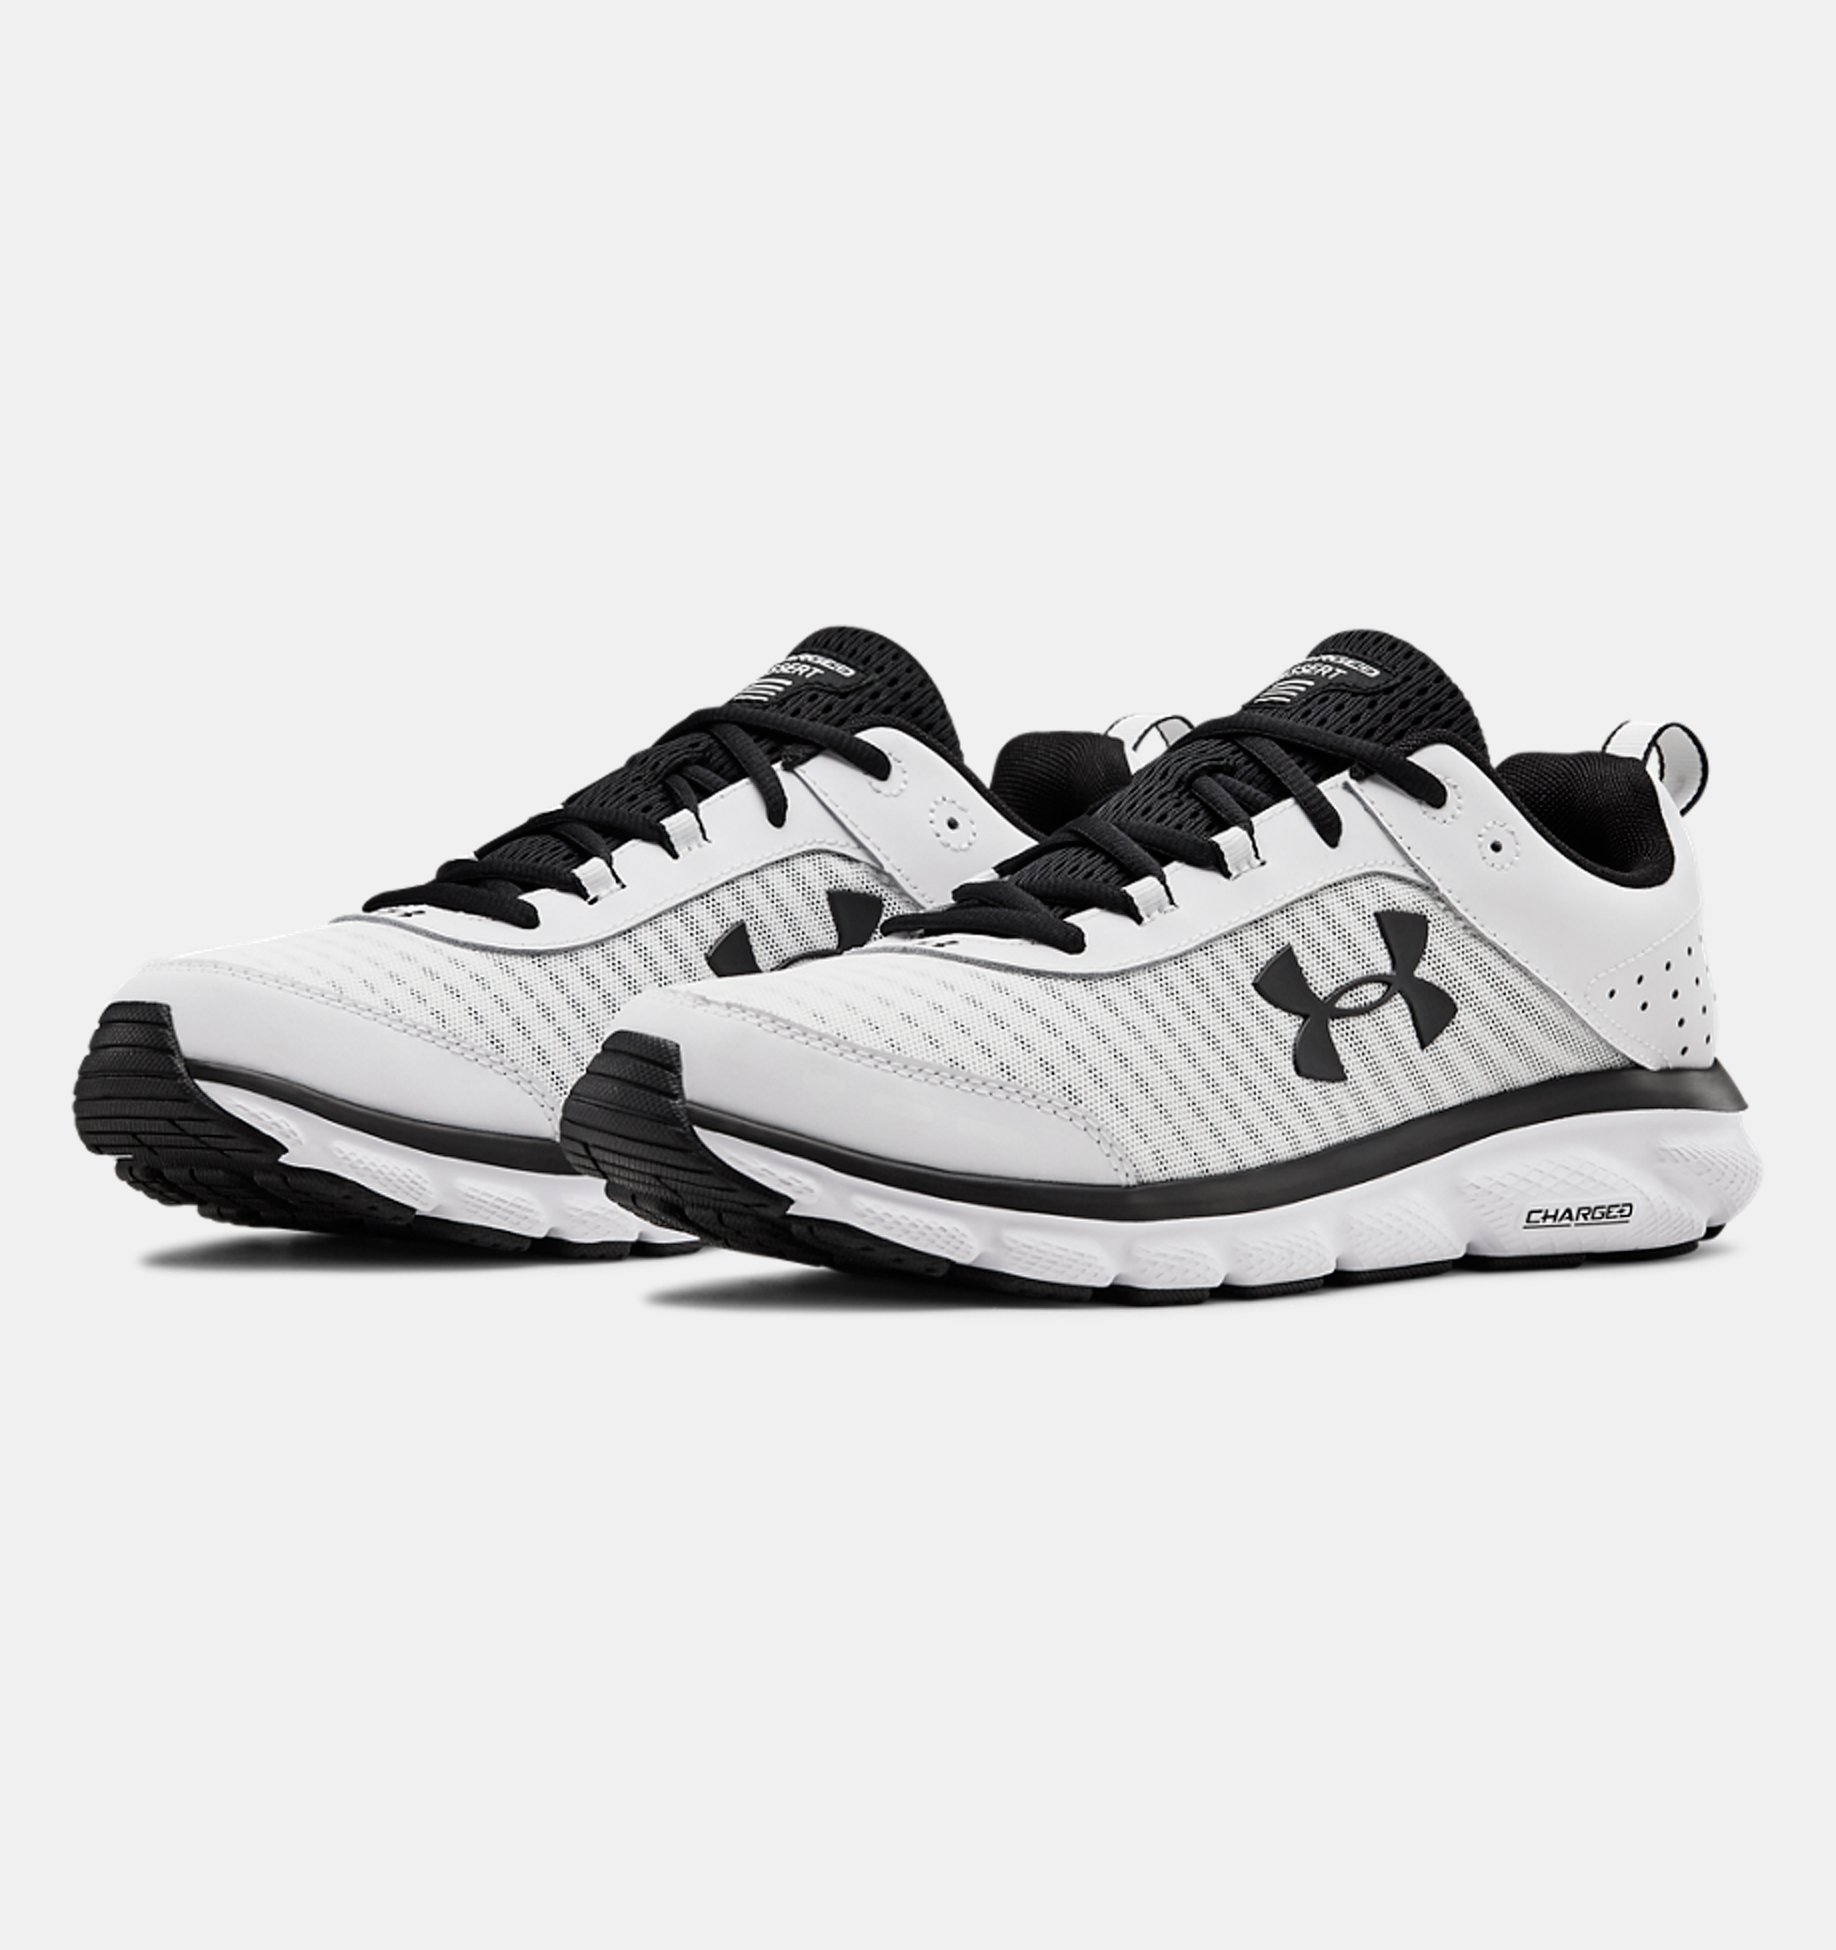 Under Armour Chaussures Athlétiques